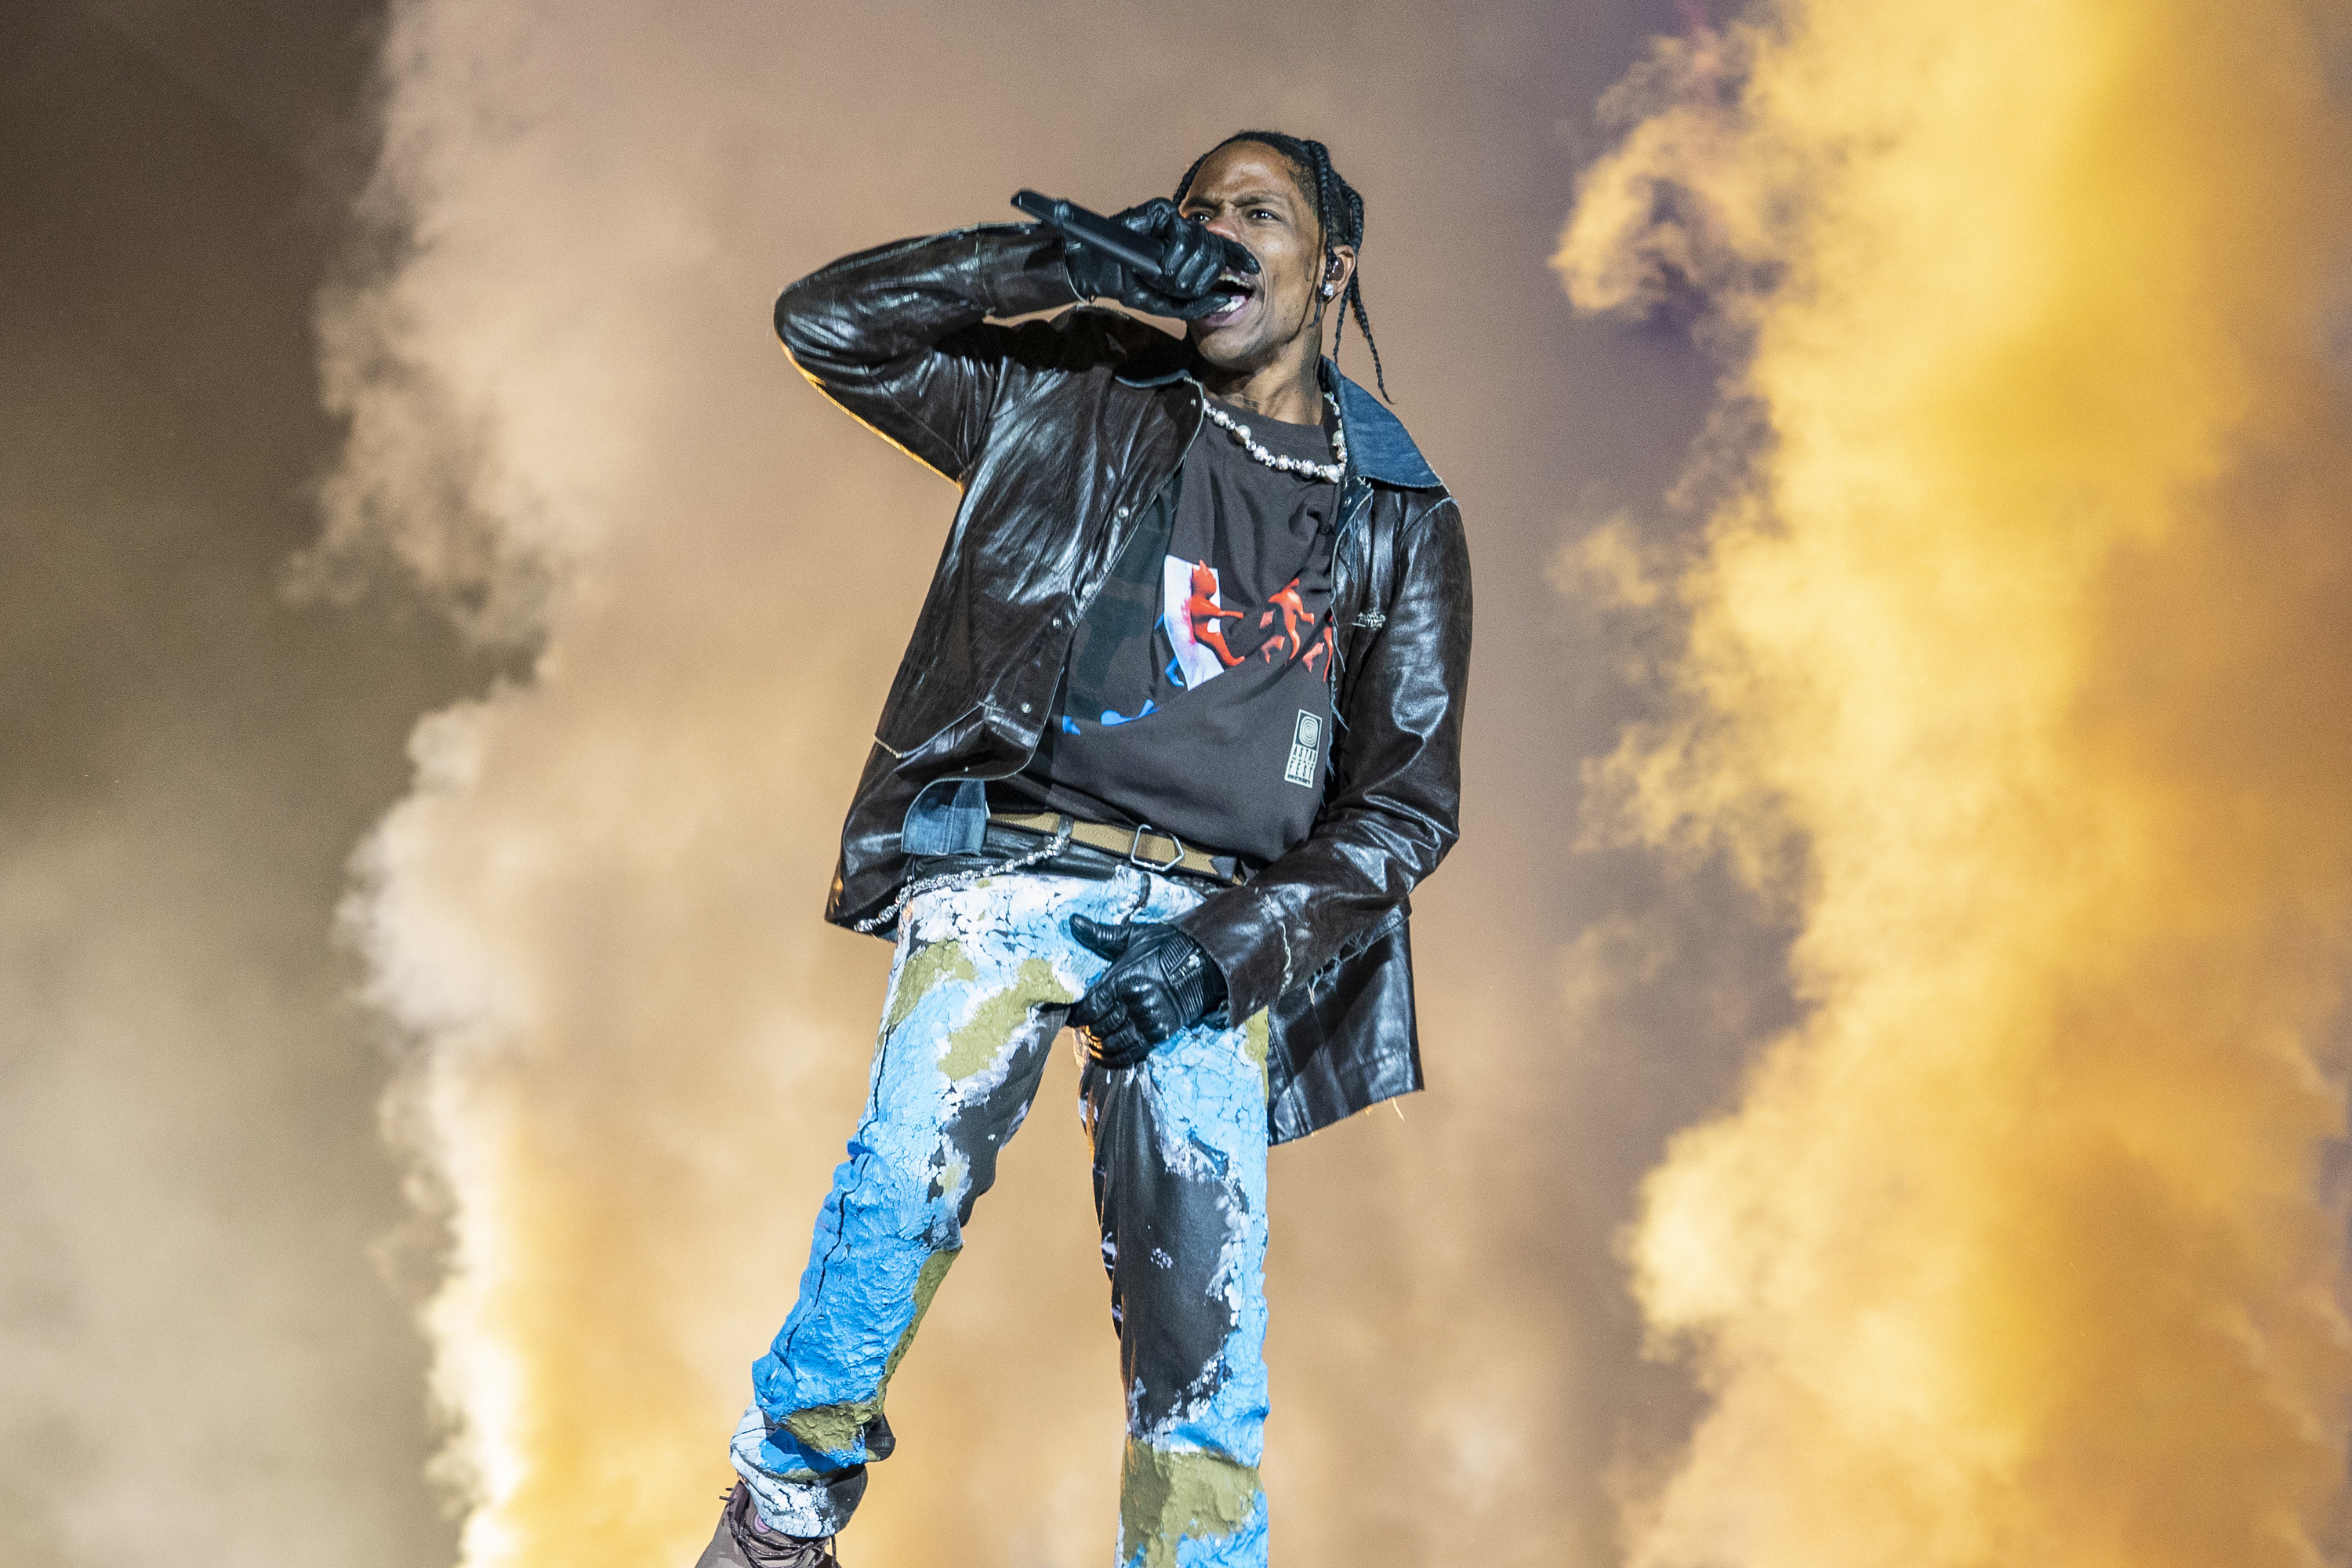 Travis Scott performing onstage during the third annual Astroworld Festival at NRG Park on November 5, 2021.